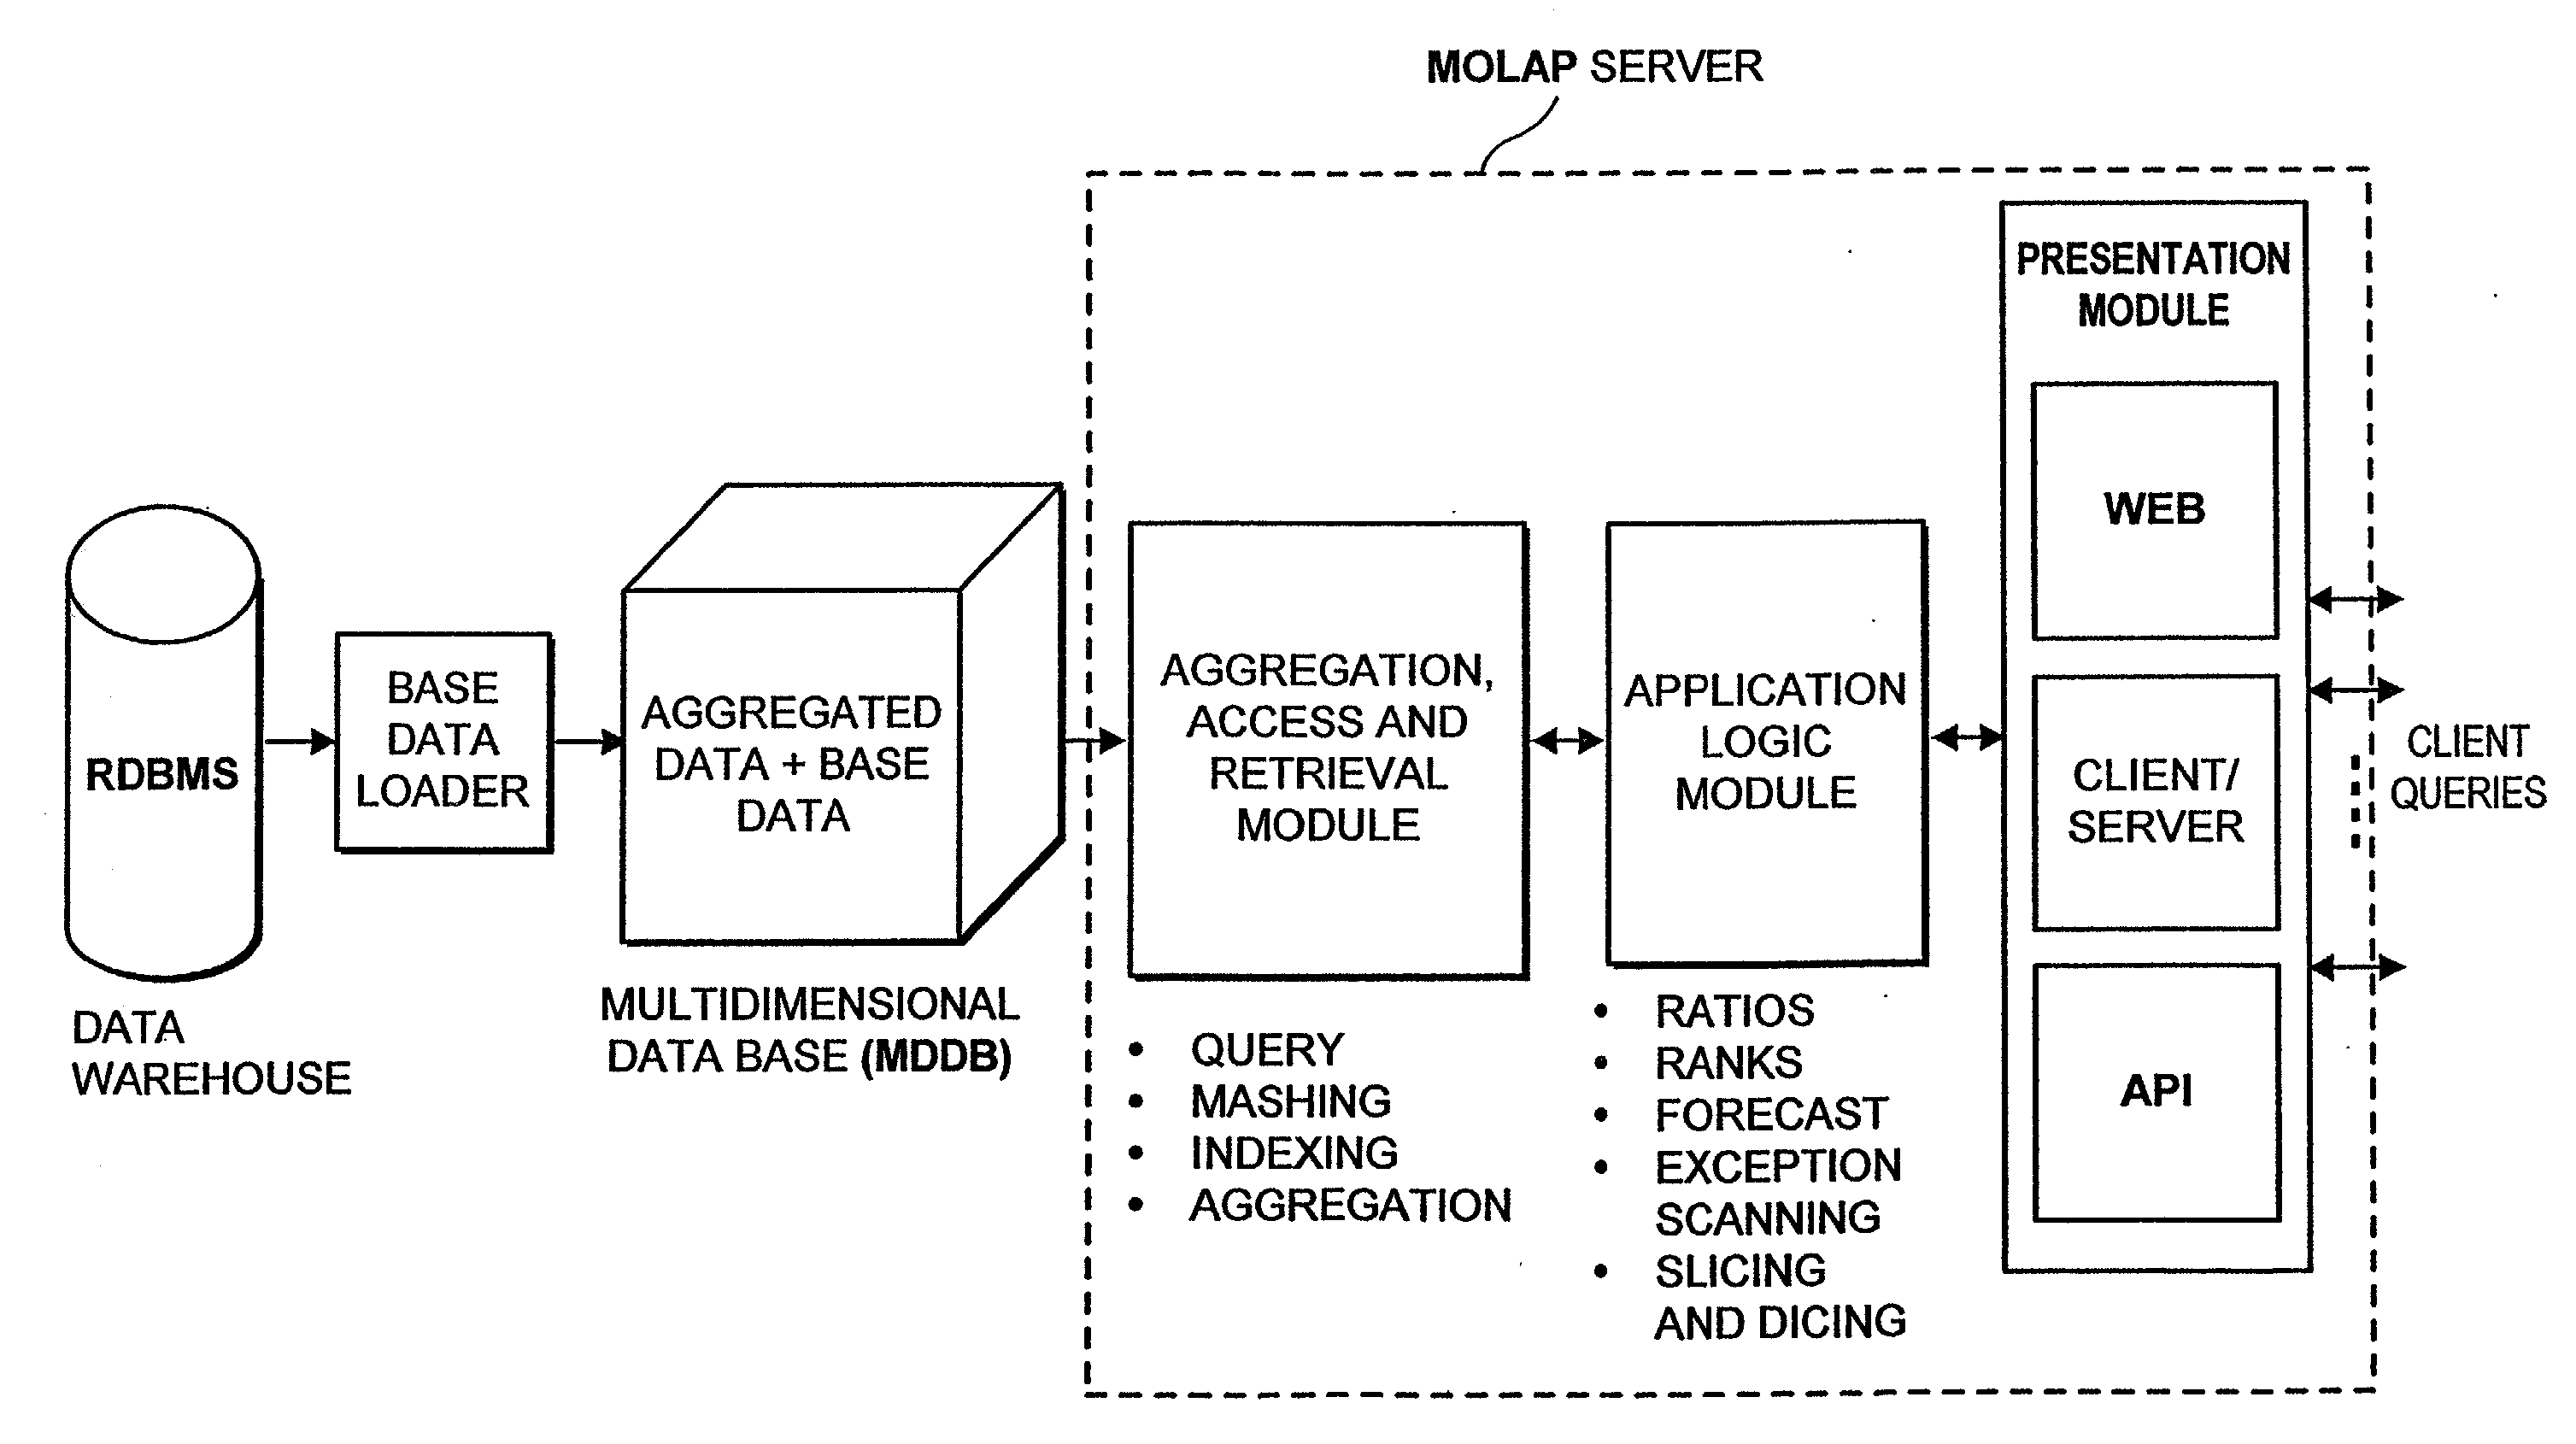 Data database and database management system having data aggregation module integrated therein